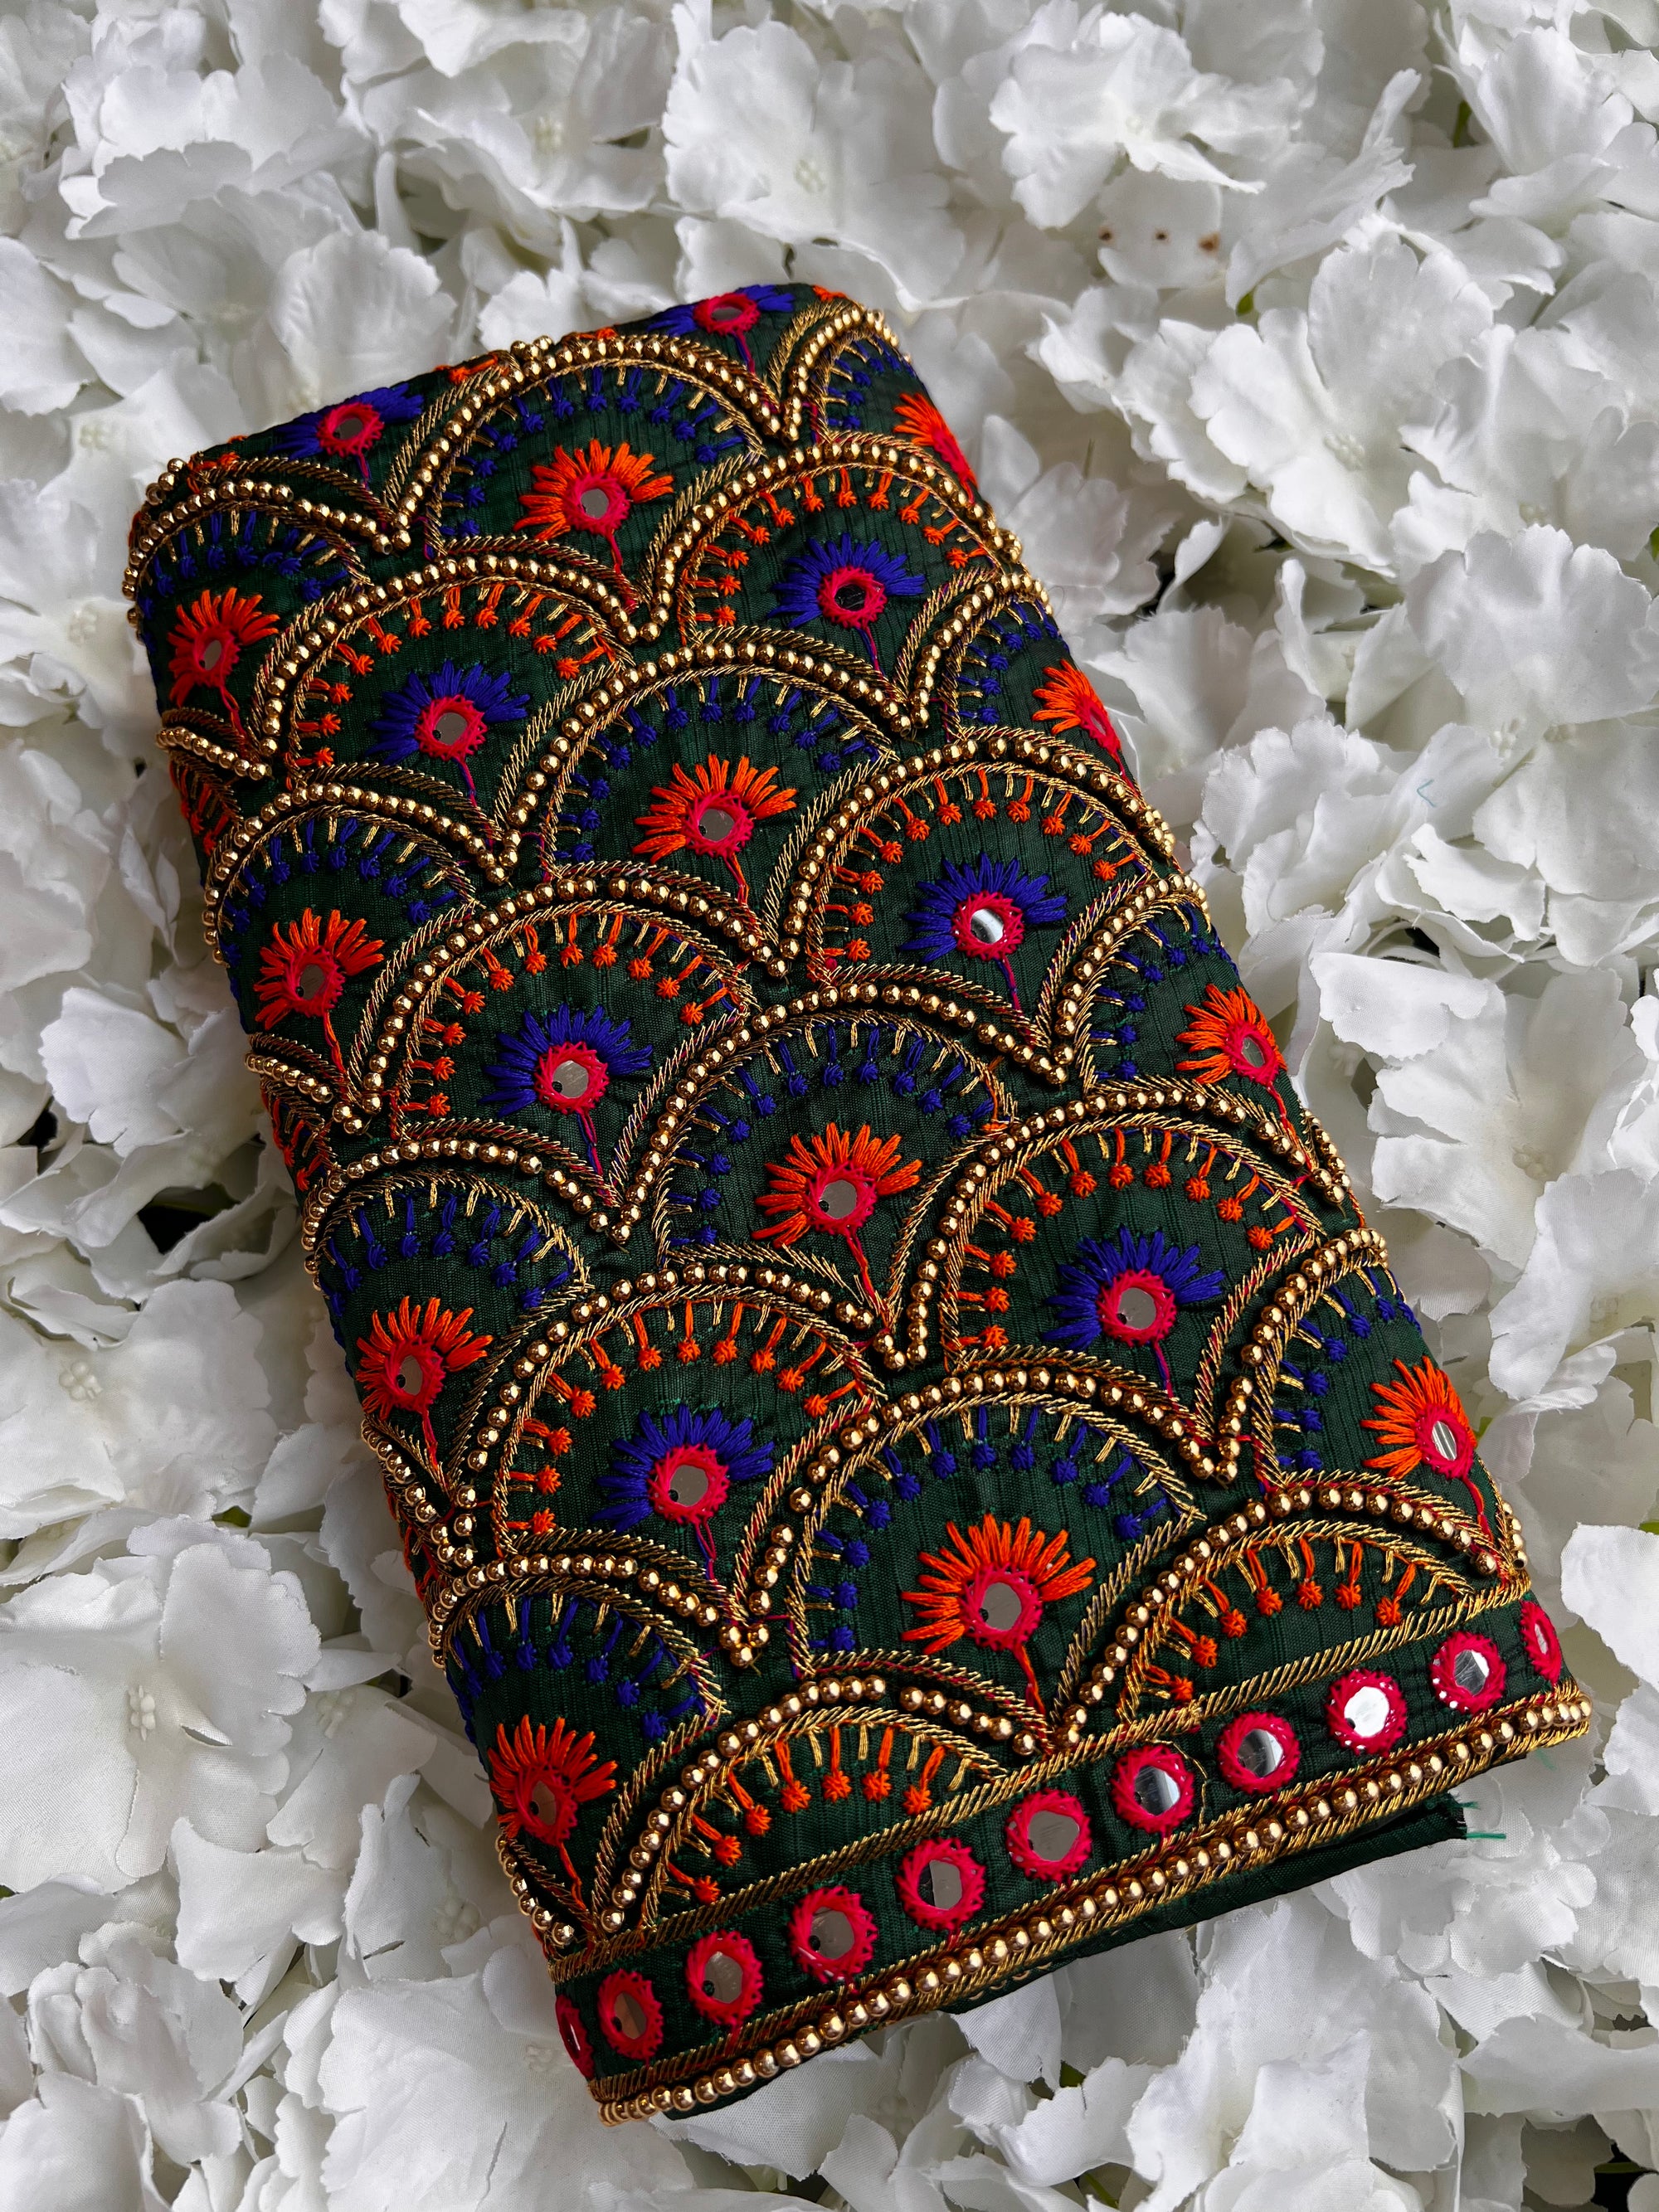 Aari or Embroidered Blouse piece